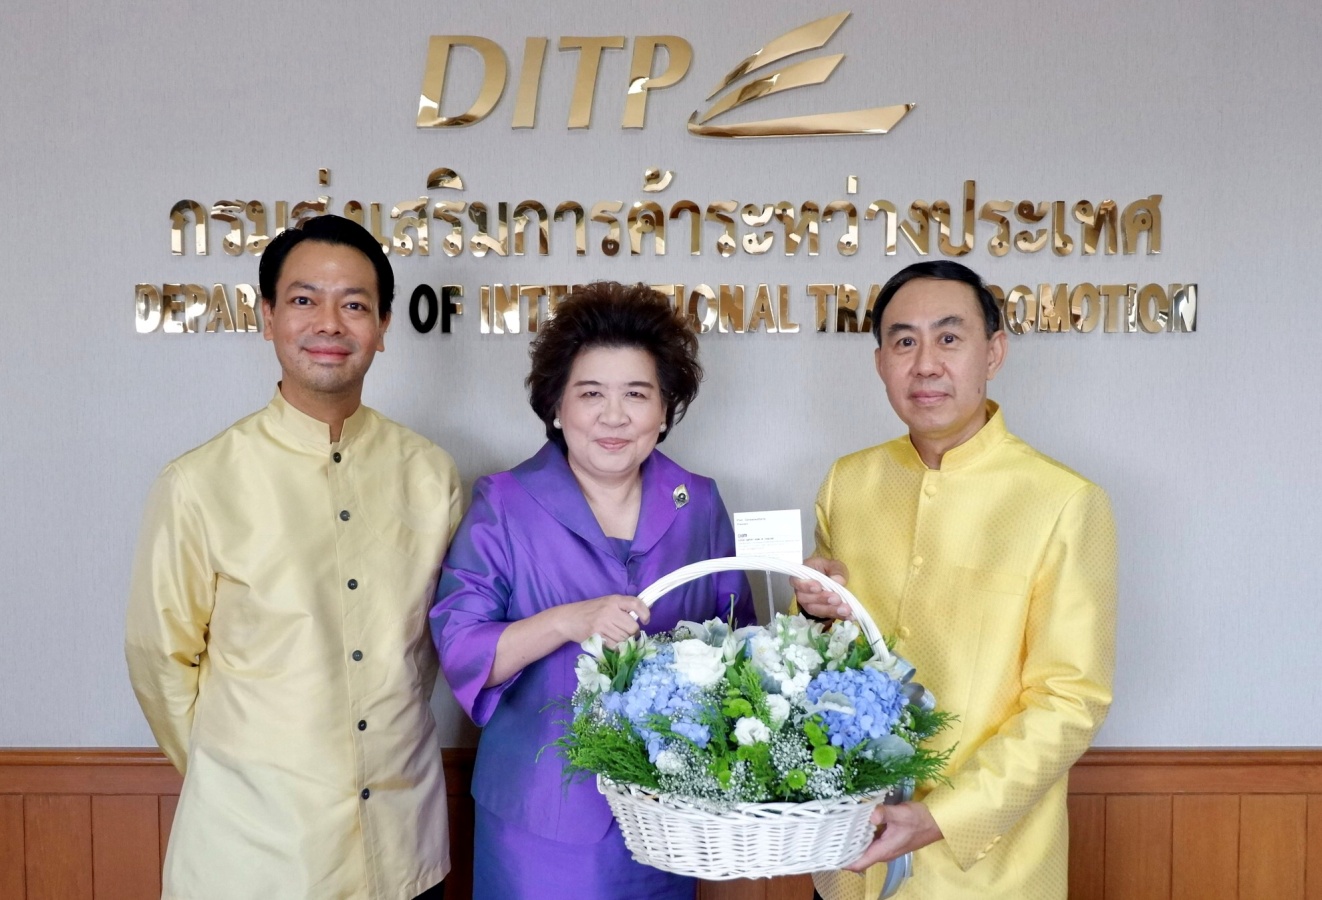 EXIM Thailand Congratulates New Director-General of Department of International Trade Promotion